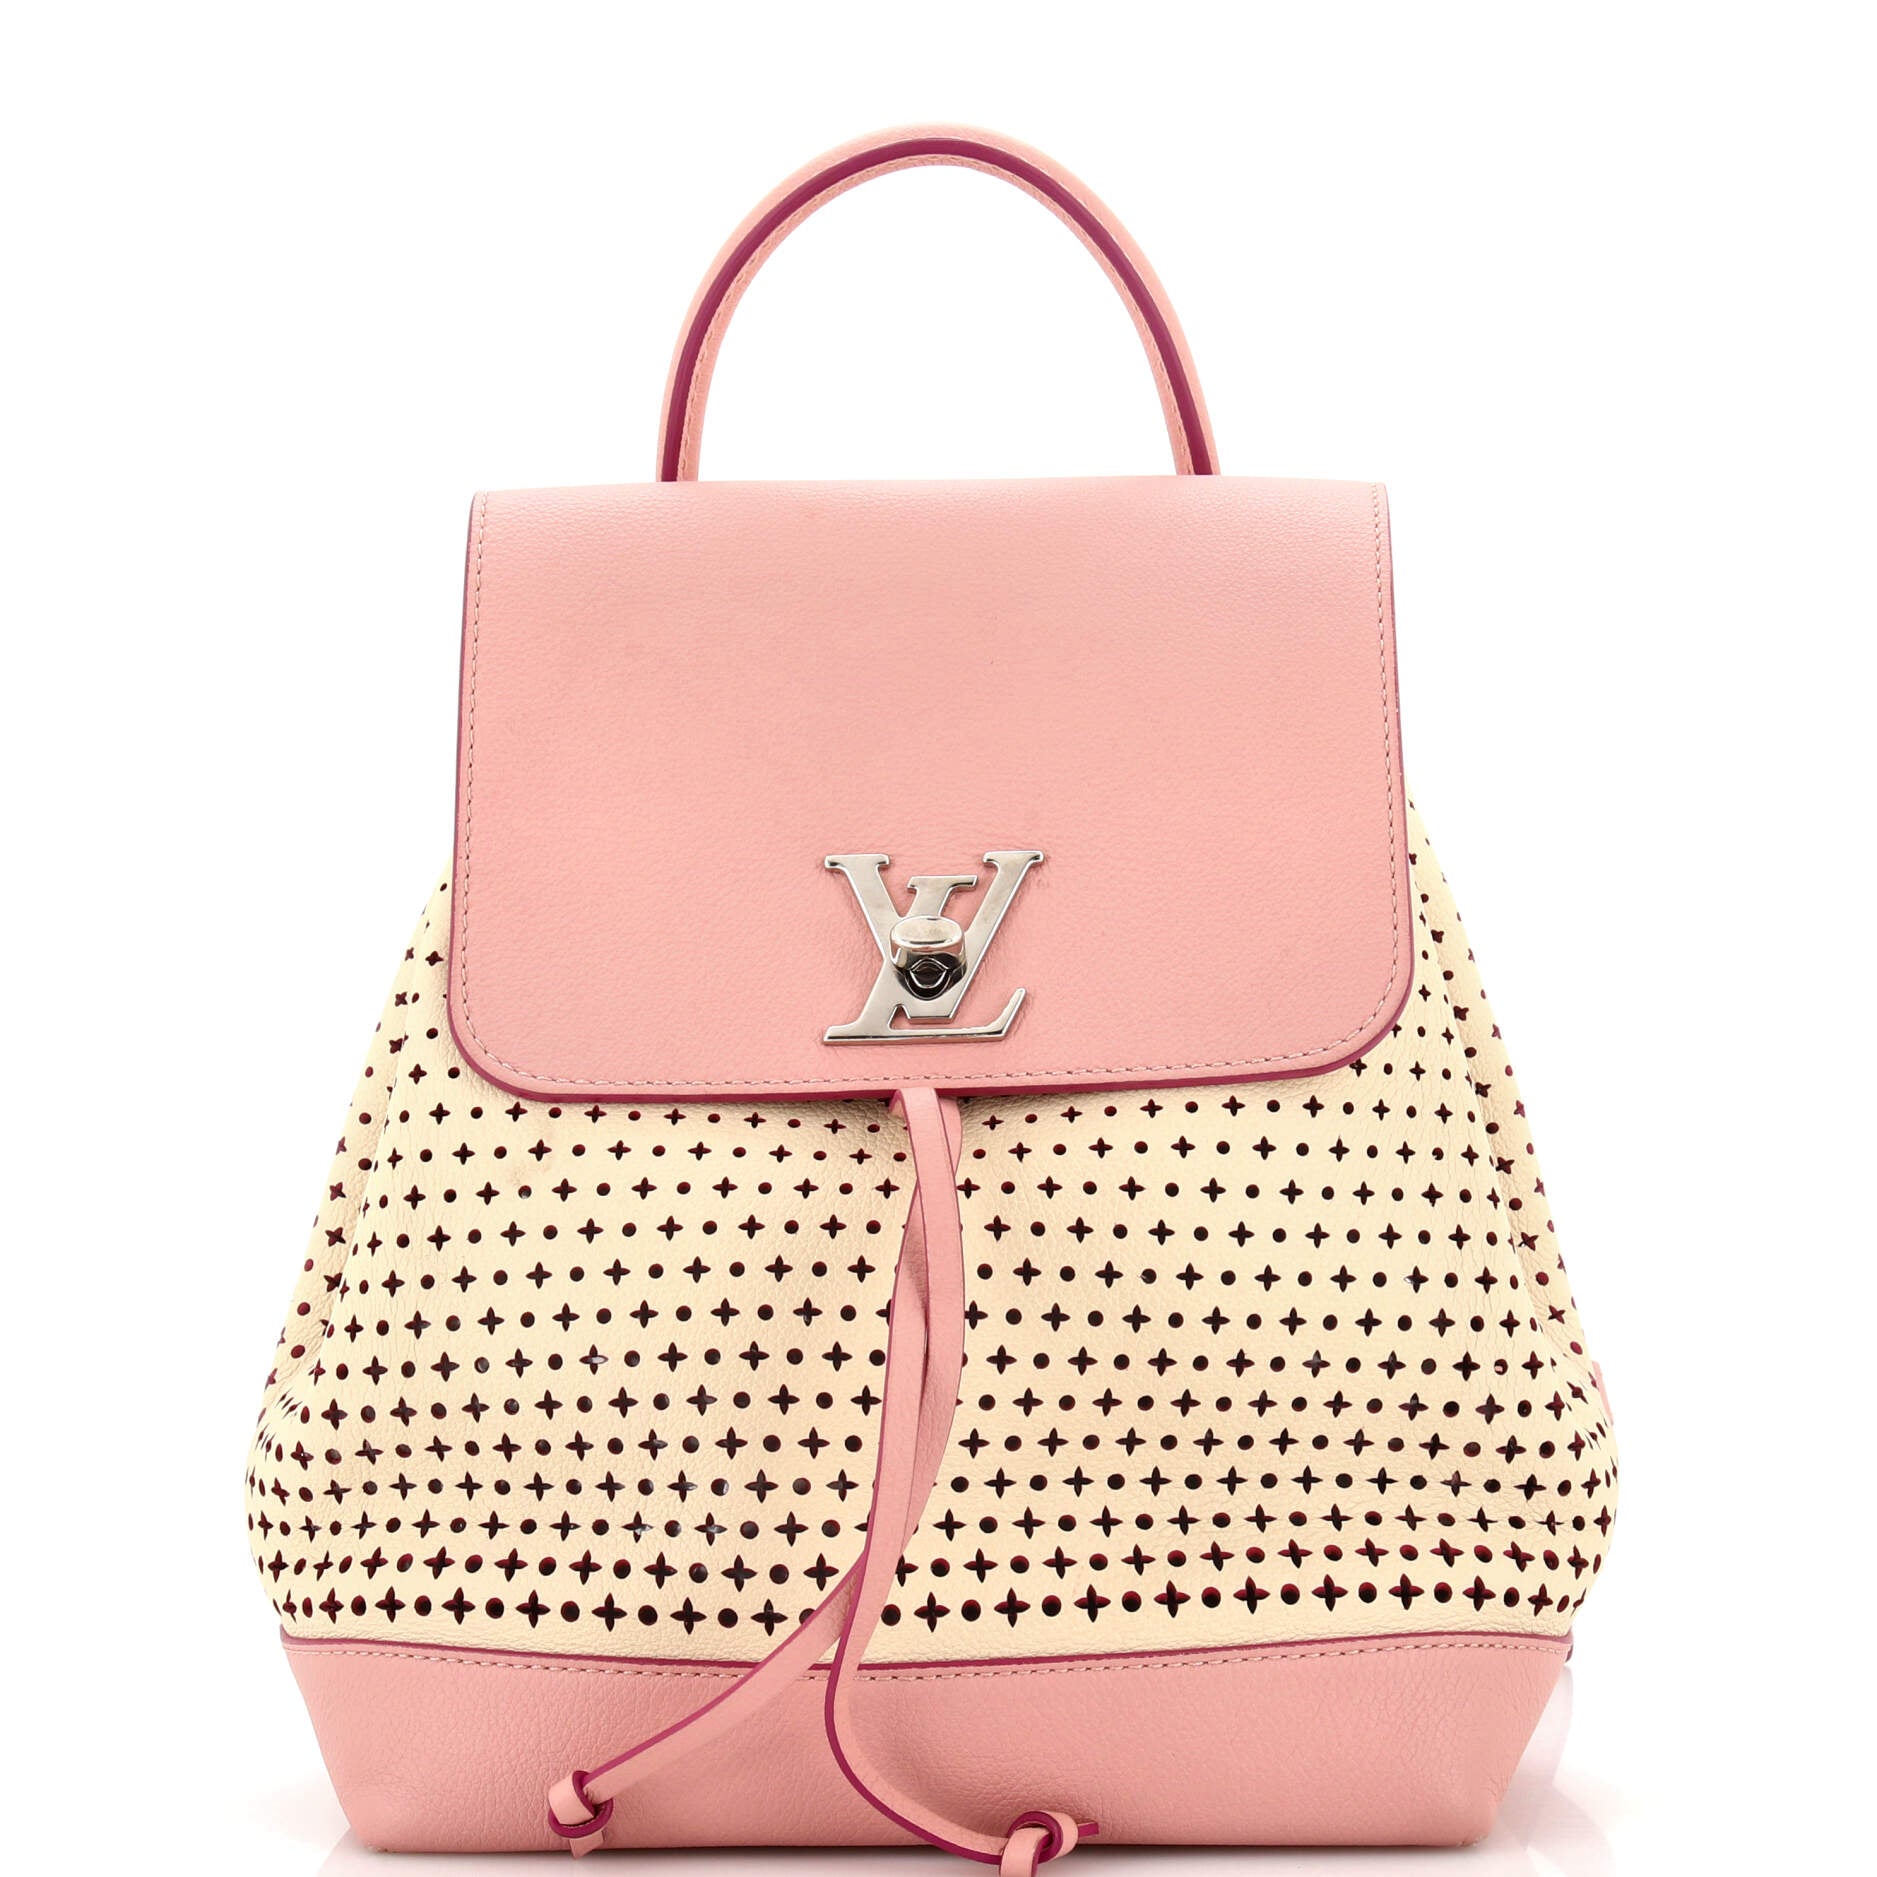 Lockme Backpack Perforated Leather